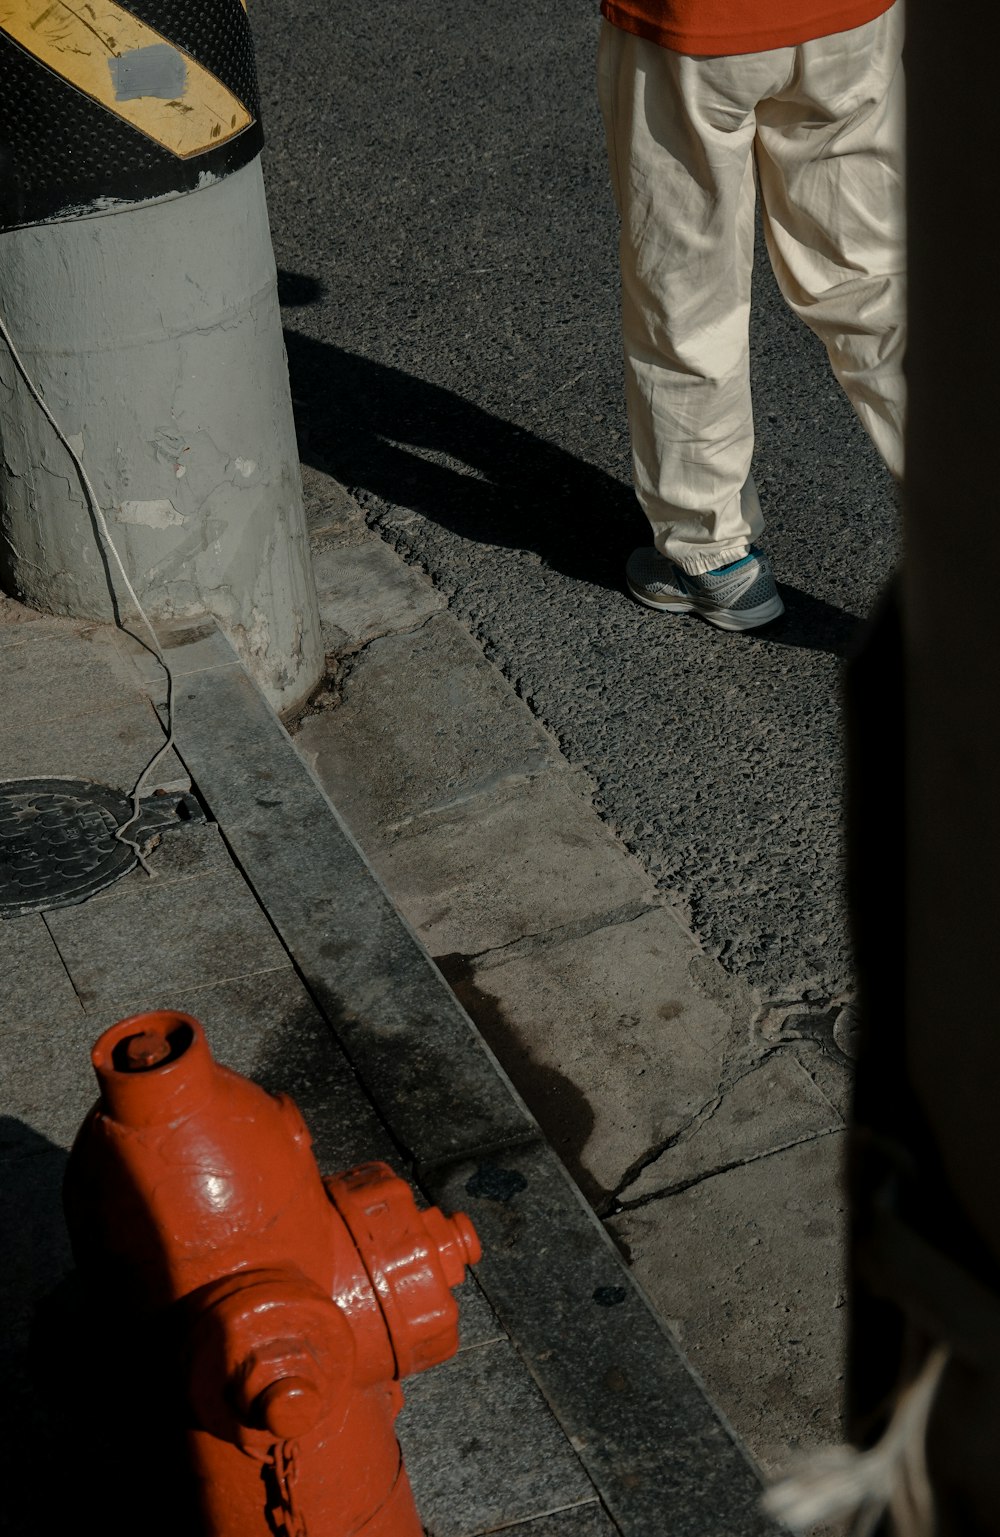 a person stands next to a fire hydrant